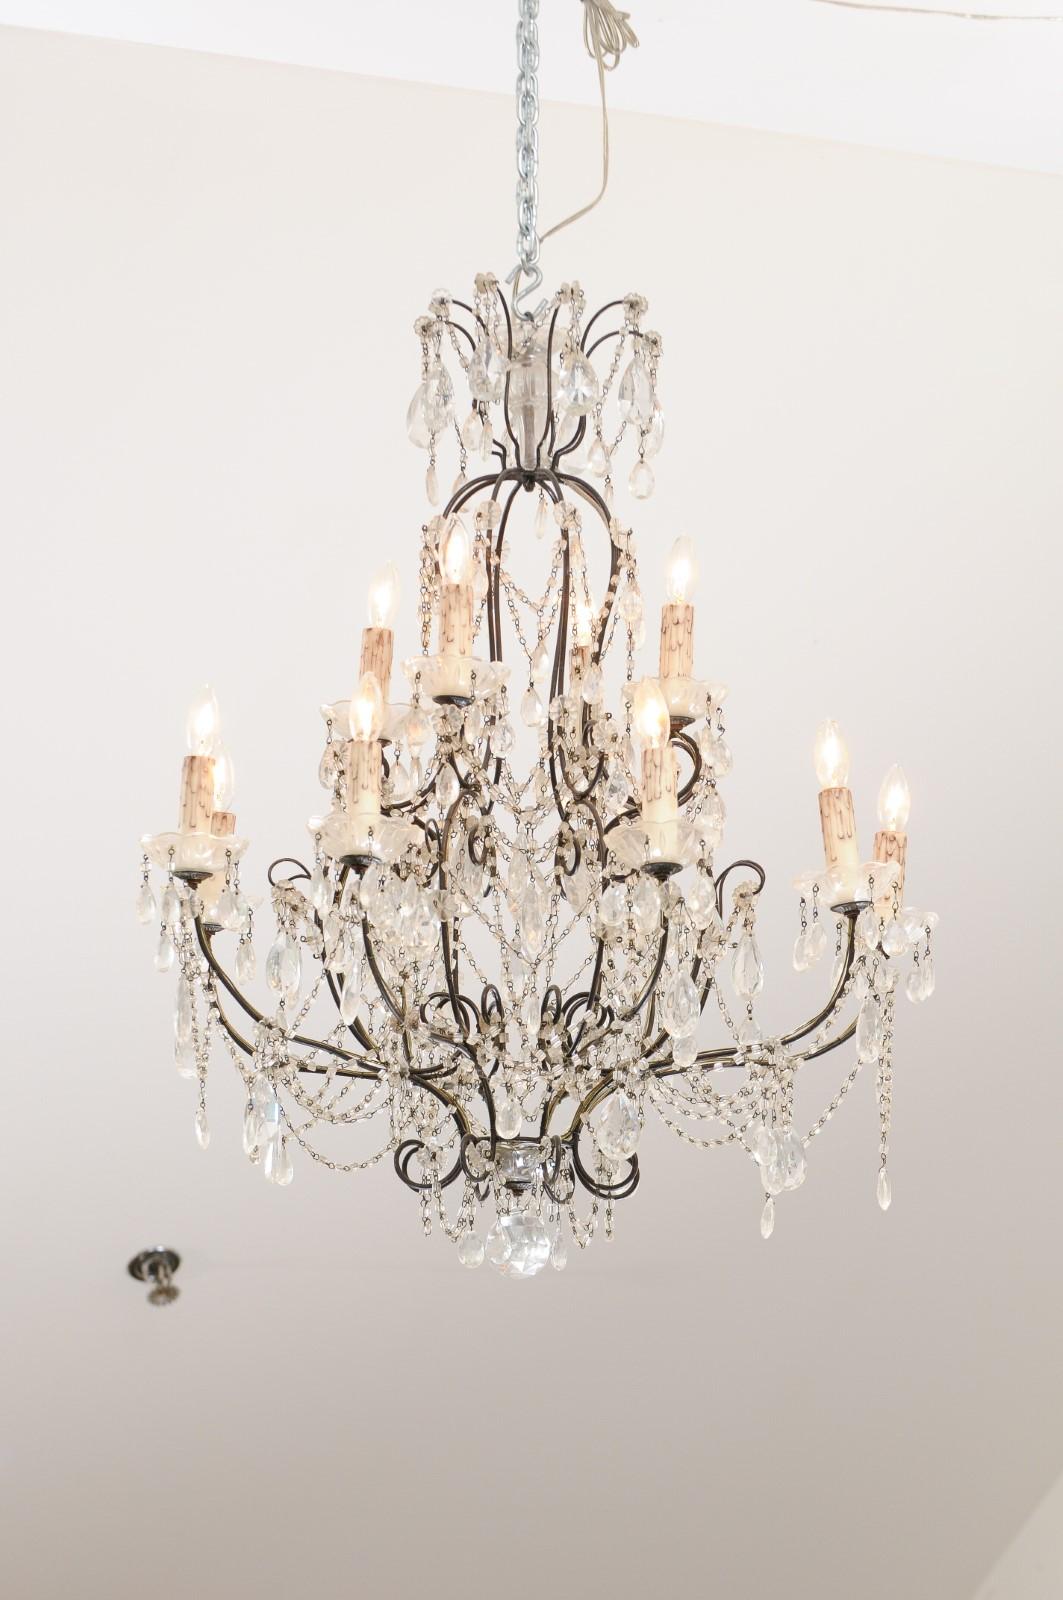 An Italian 10-light crystal chandelier from the 19th century, with iron armature and scrolling arms. Created in Italy during the 19th century, this chandelier features an iron structure supporting faceted crystals and rosettes connected to one